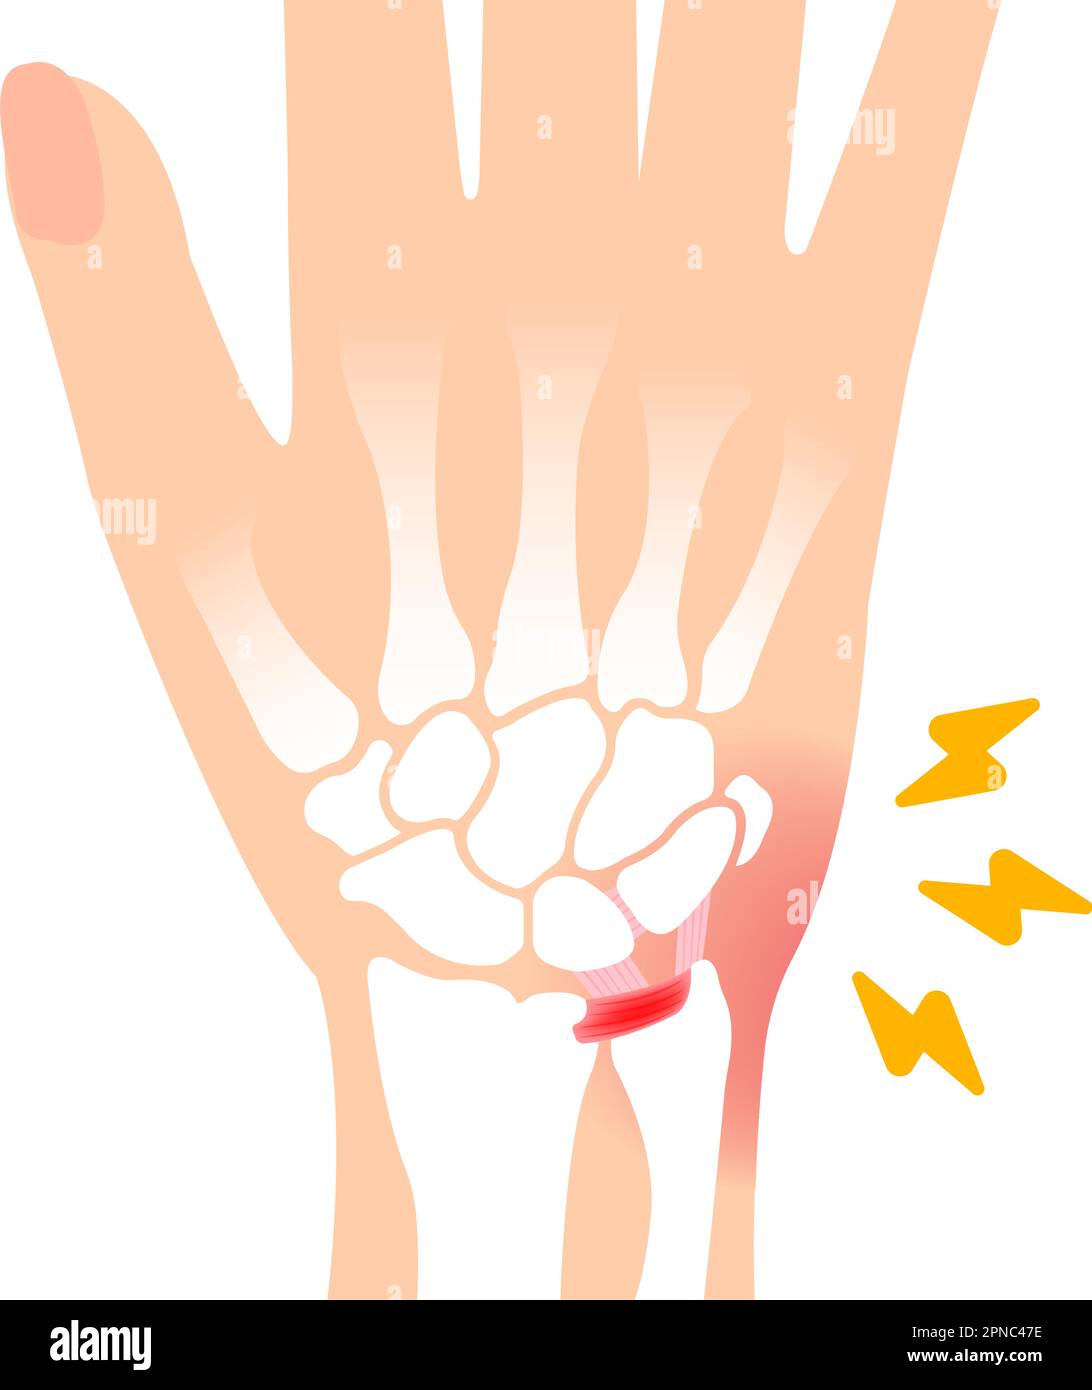 About TFCC injury. Vector illustration Stock Vector